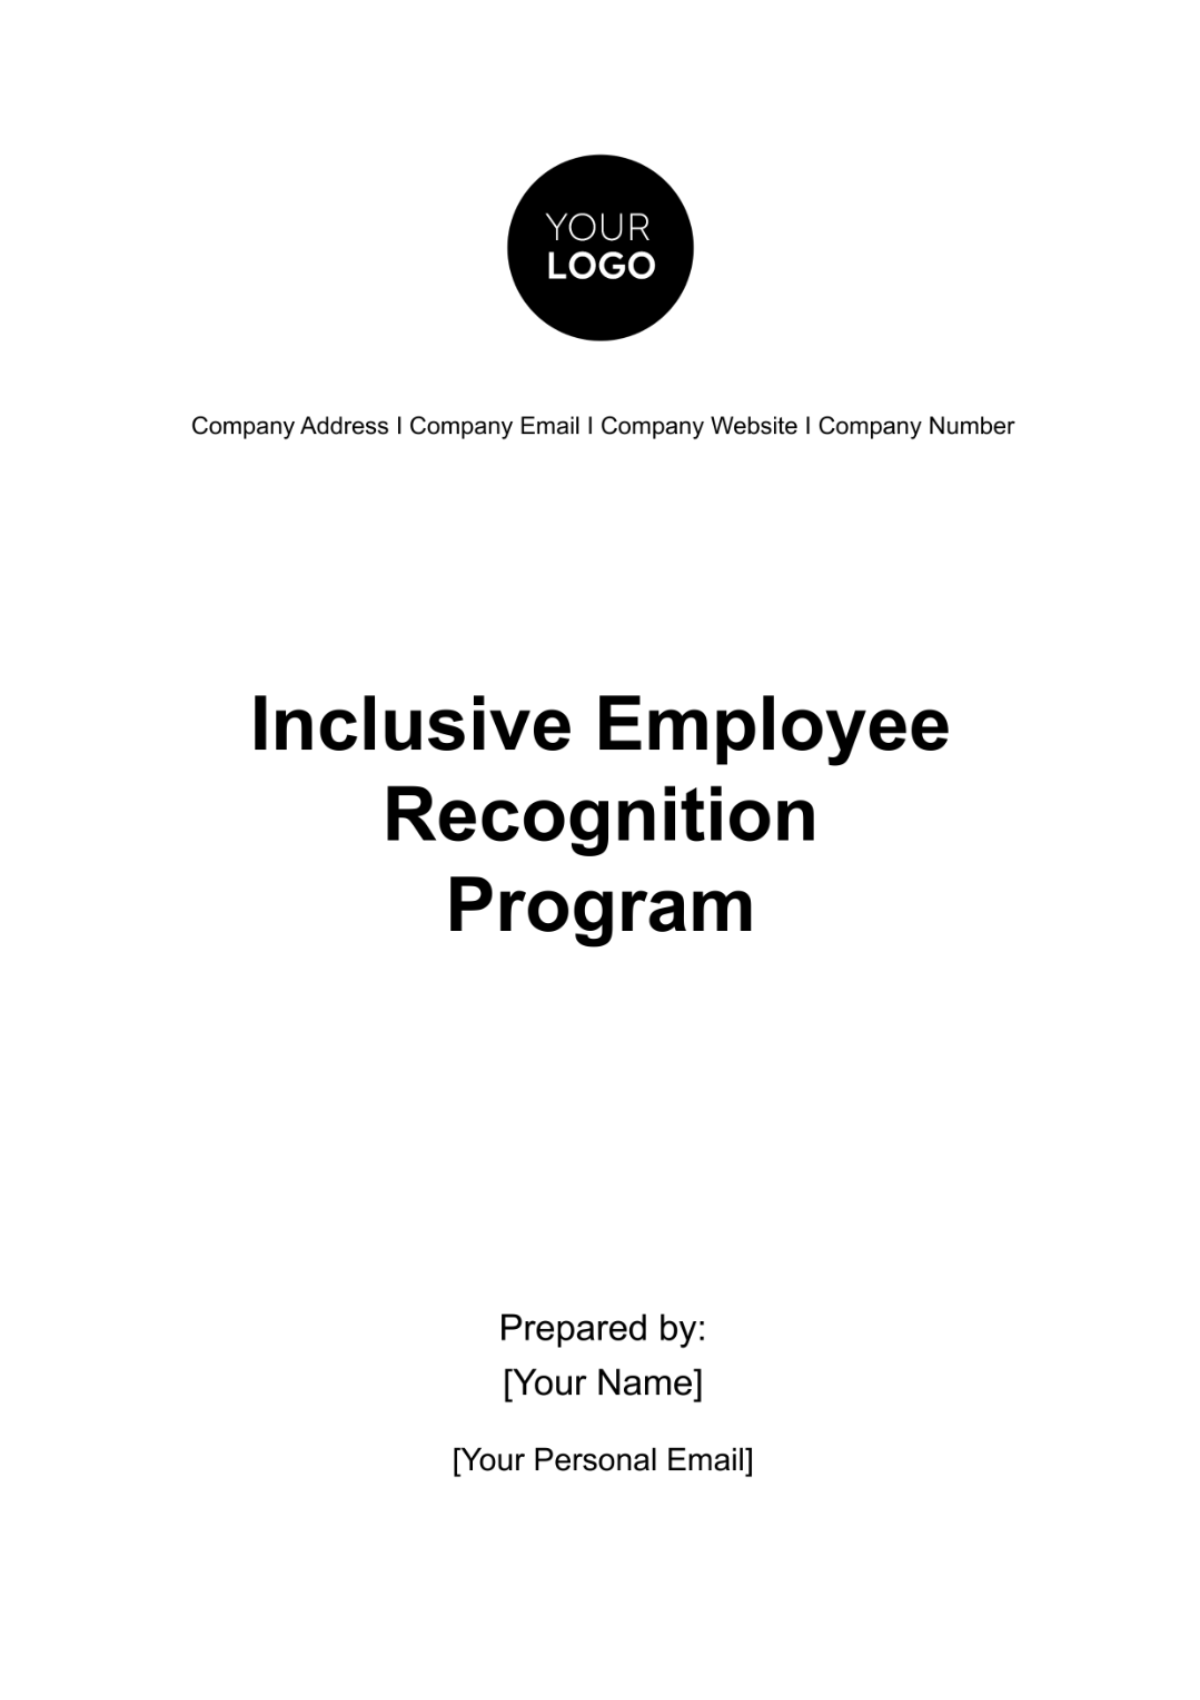 Free Inclusive Employee Recognition Program HR Template